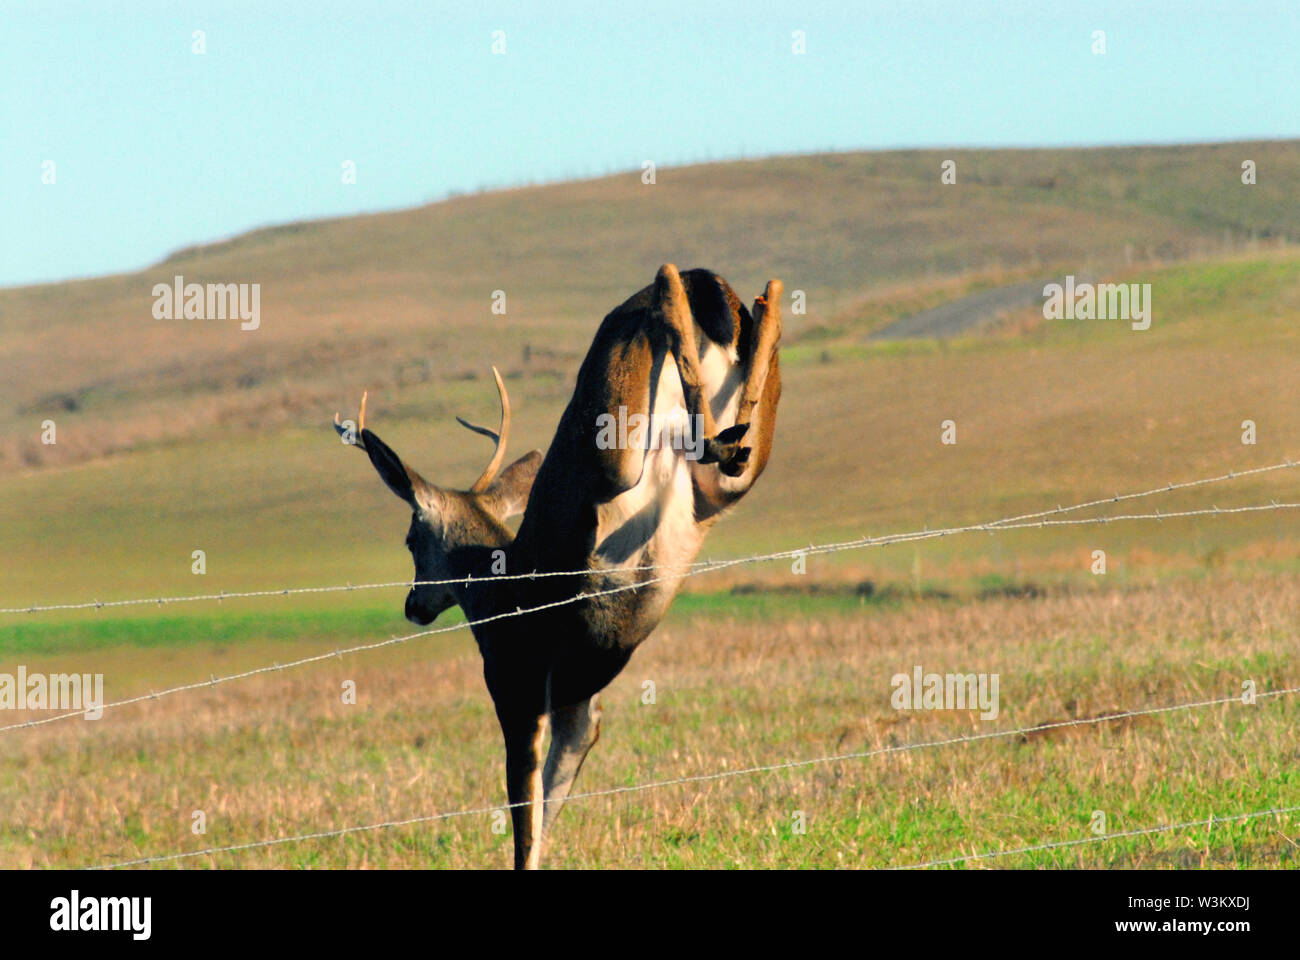 A close up action shot of a deer jumping over a farmer's barbed wire fence in the hills North of San Francisco, California, USA Stock Photo